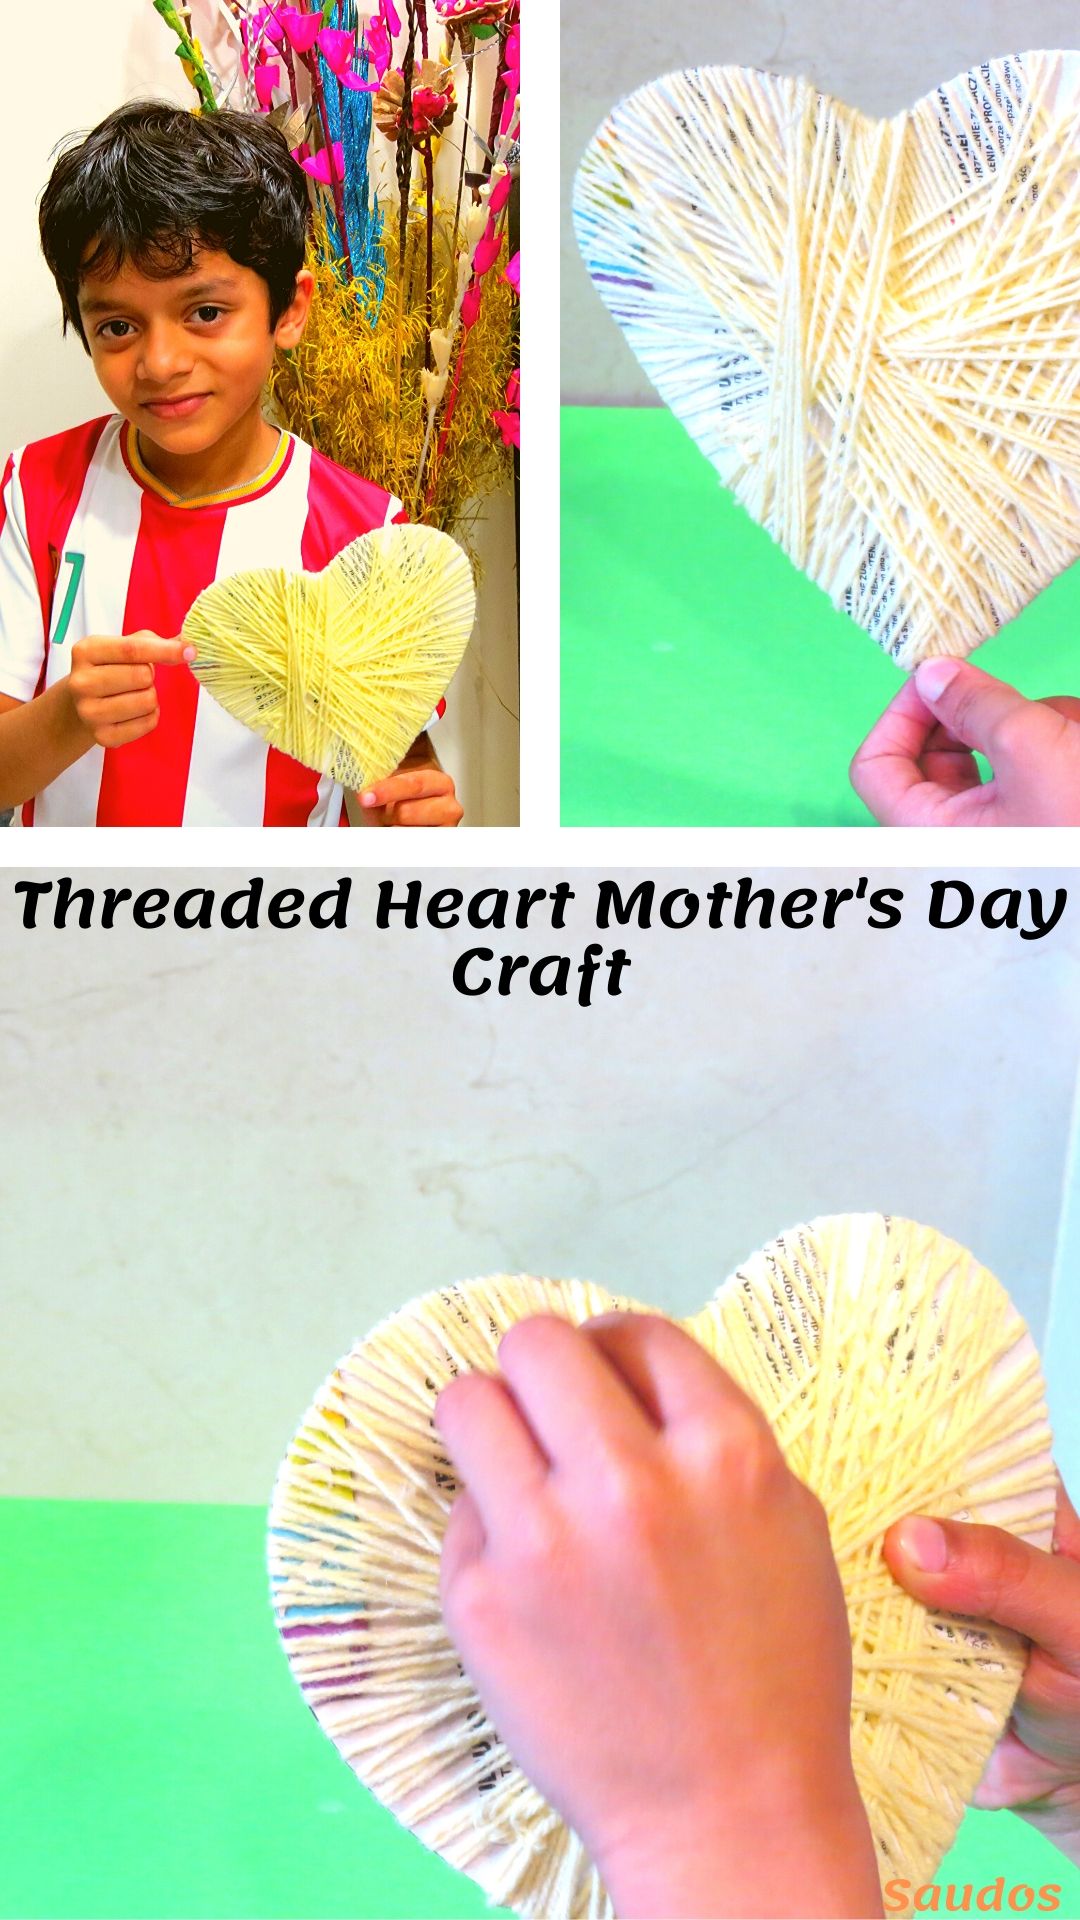 Threaded Heart Mother's Day Craft